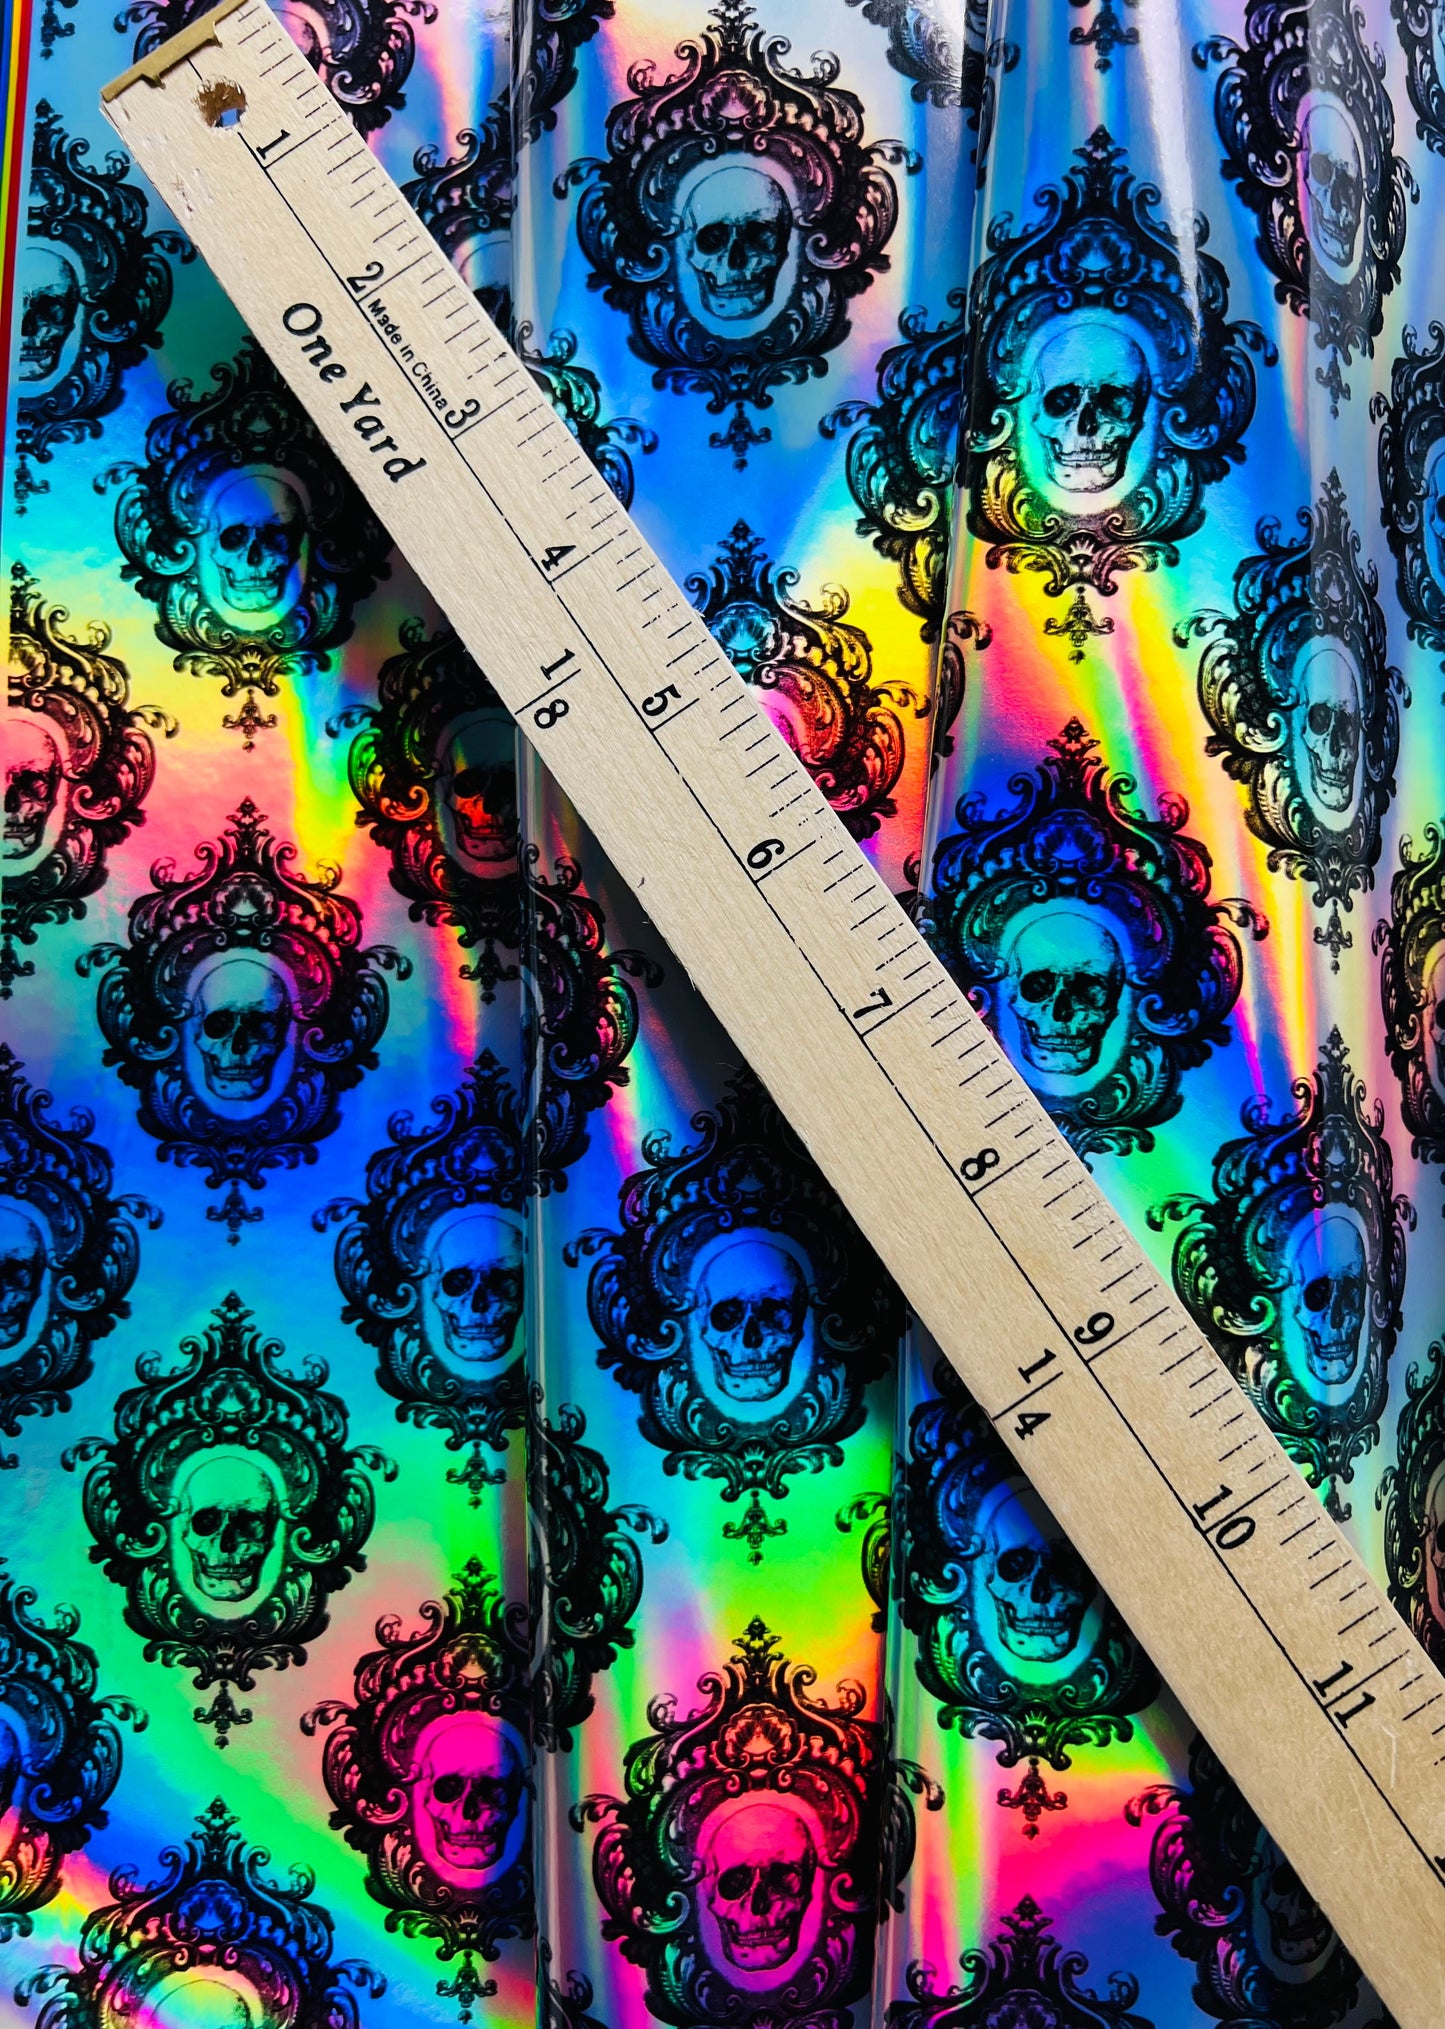 RETAIL Printed Holographic .5mm Soft Back VINYL